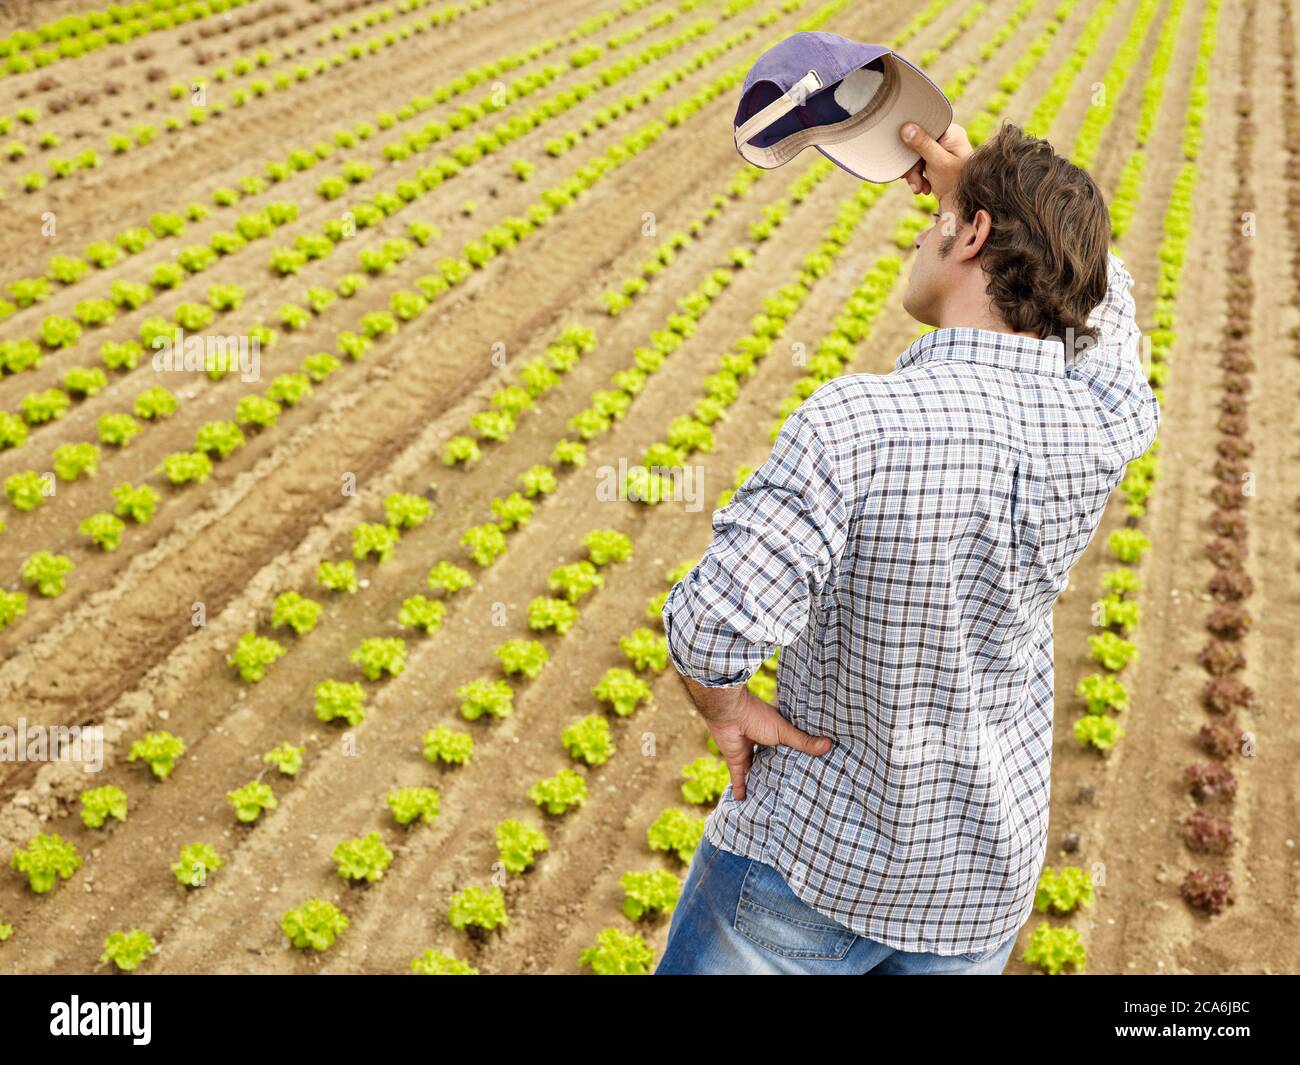 Tired Farmer Wiping Sweat And Contemplating Plants In Greenhouse Stock Photo